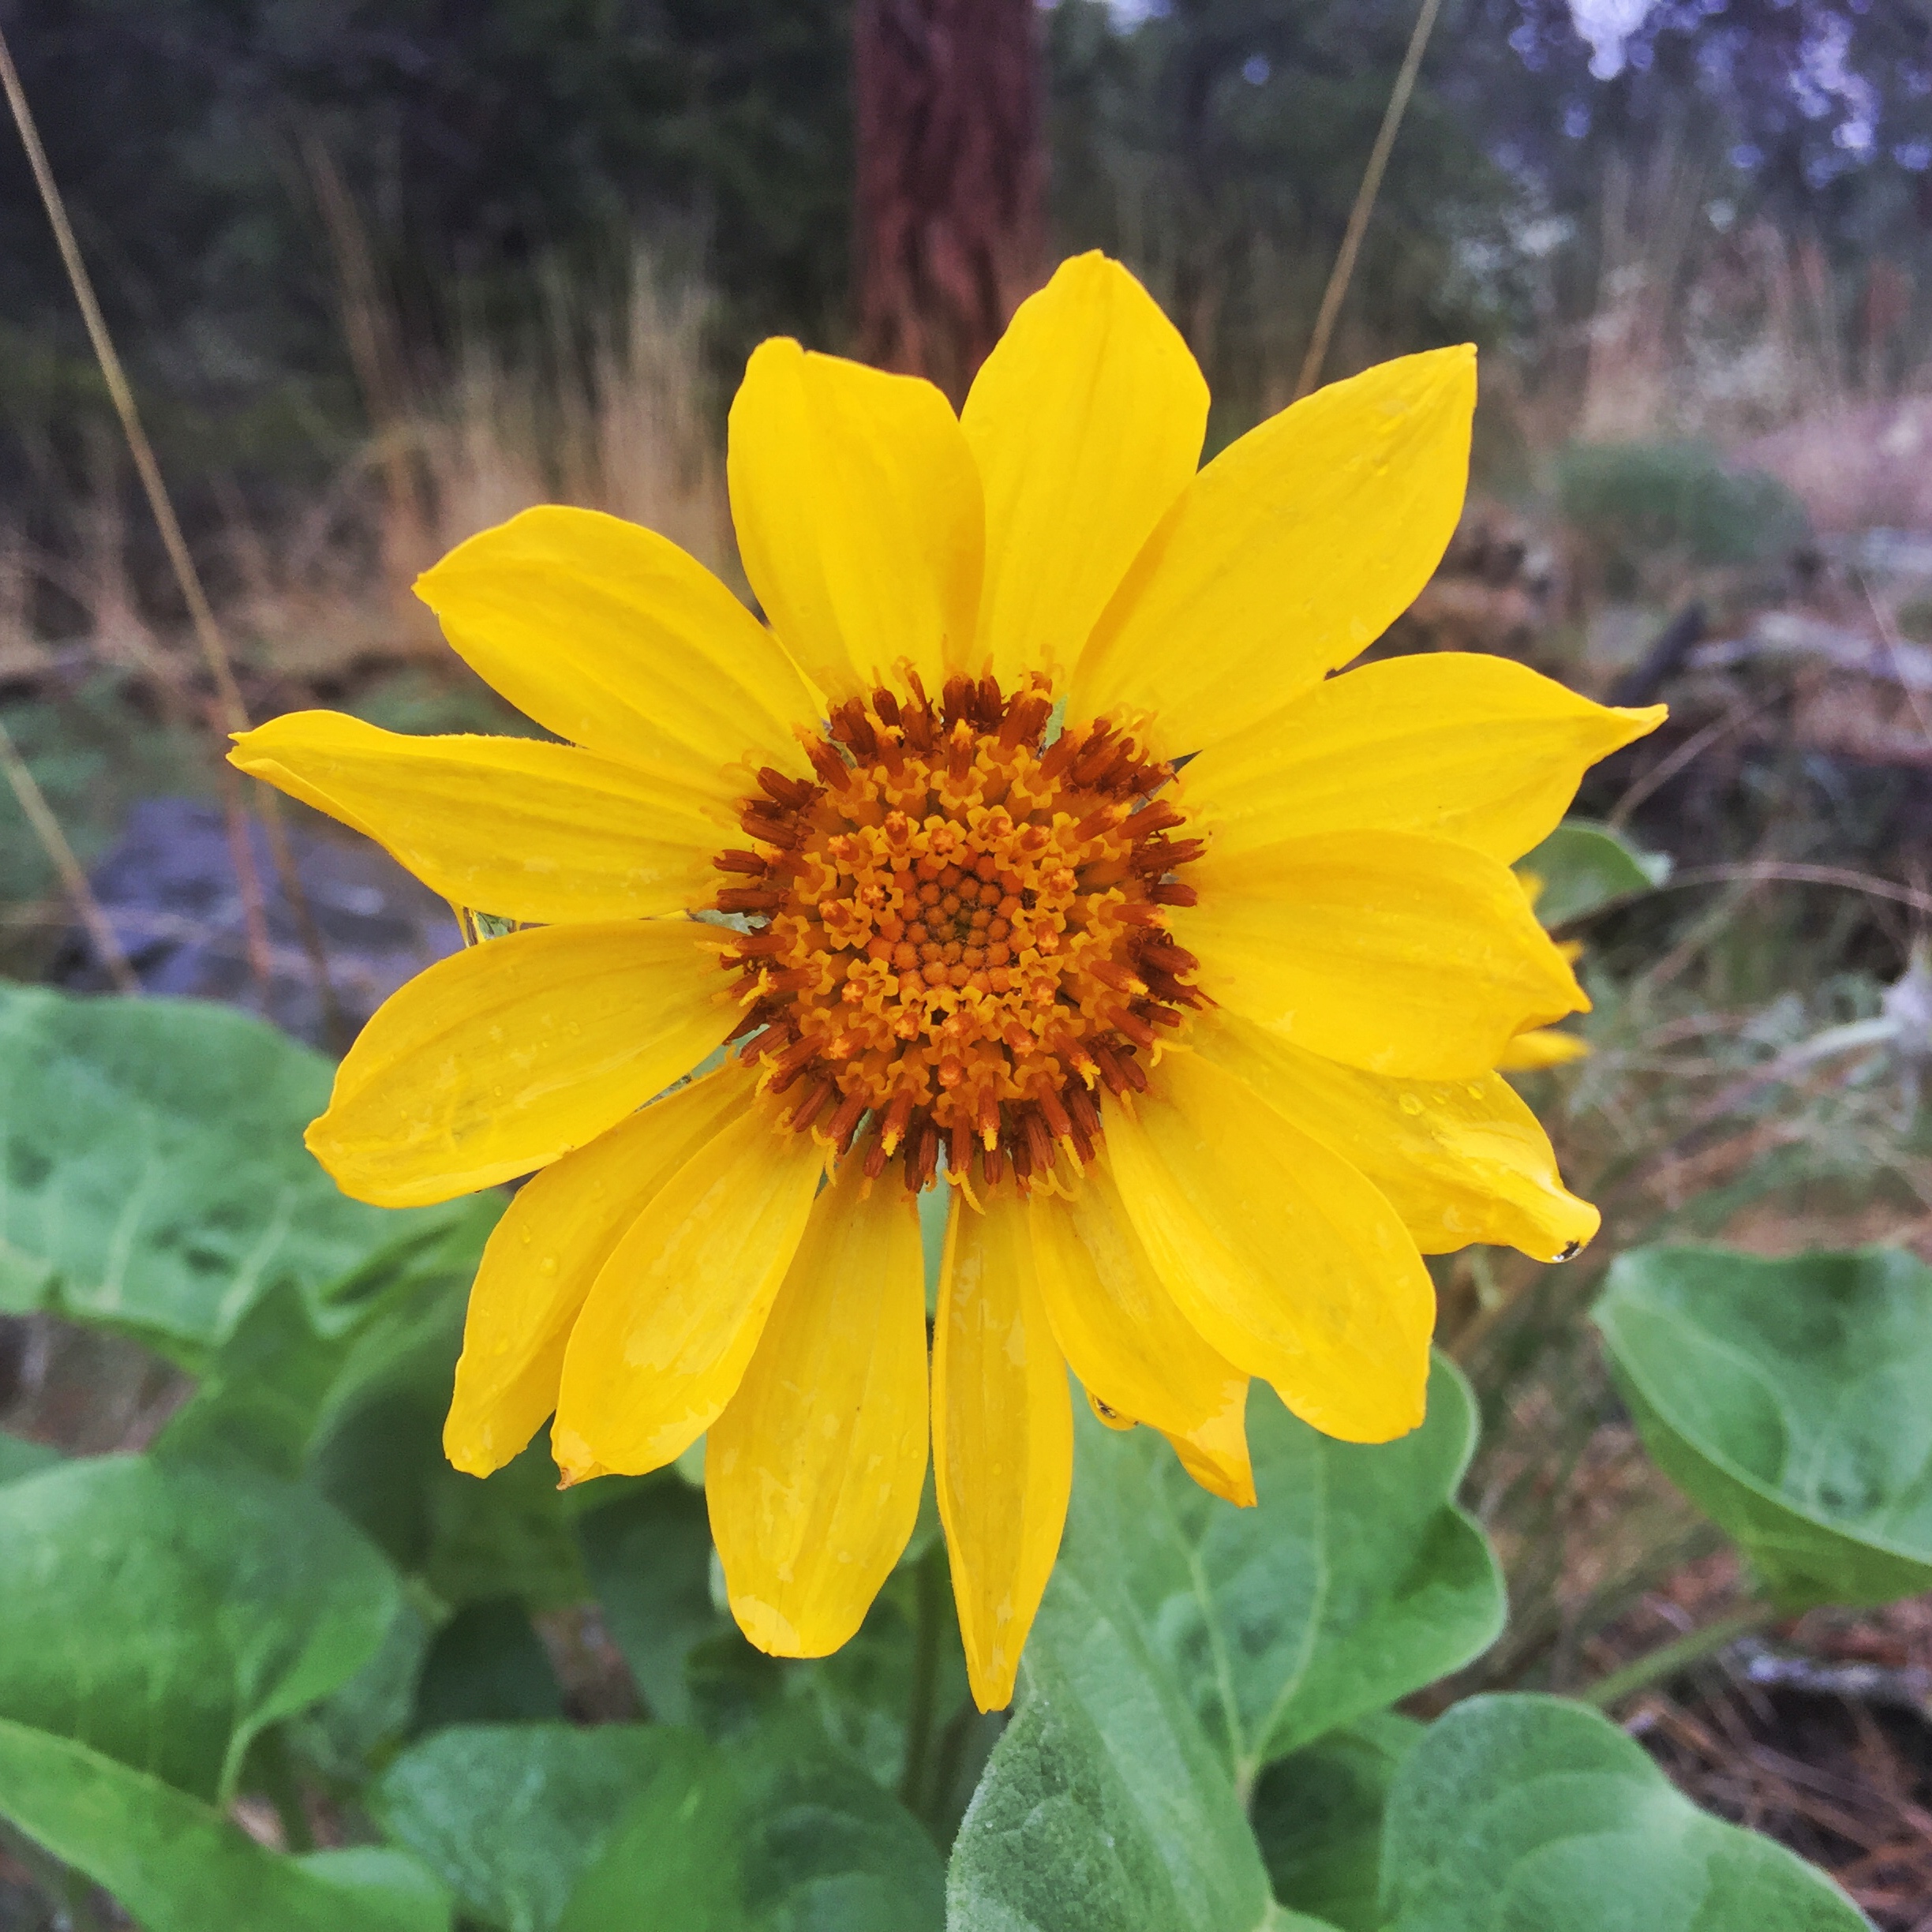 photo of arrowleaf balsamroot flower taken in Naramata, BC in the South Okanagan on Earth Day 2020